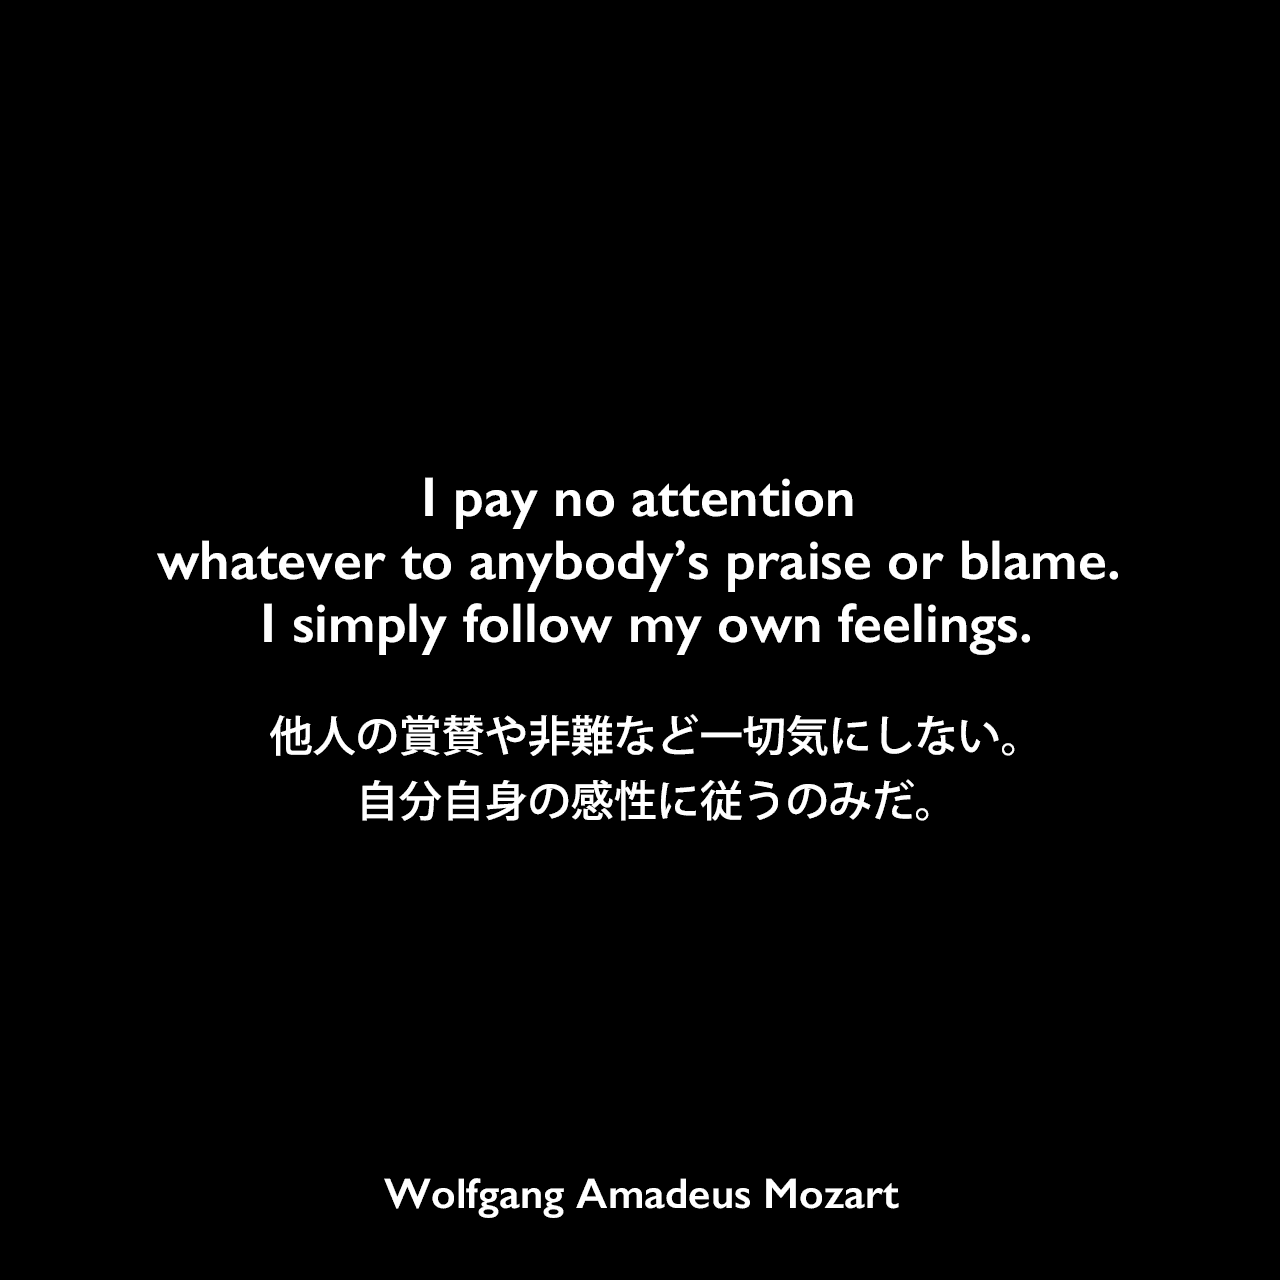 I pay no attention whatever to anybody’s praise or blame. I simply follow my own feelings.他人の賞賛や非難など一切気にしない。自分自身の感性に従うのみだ。